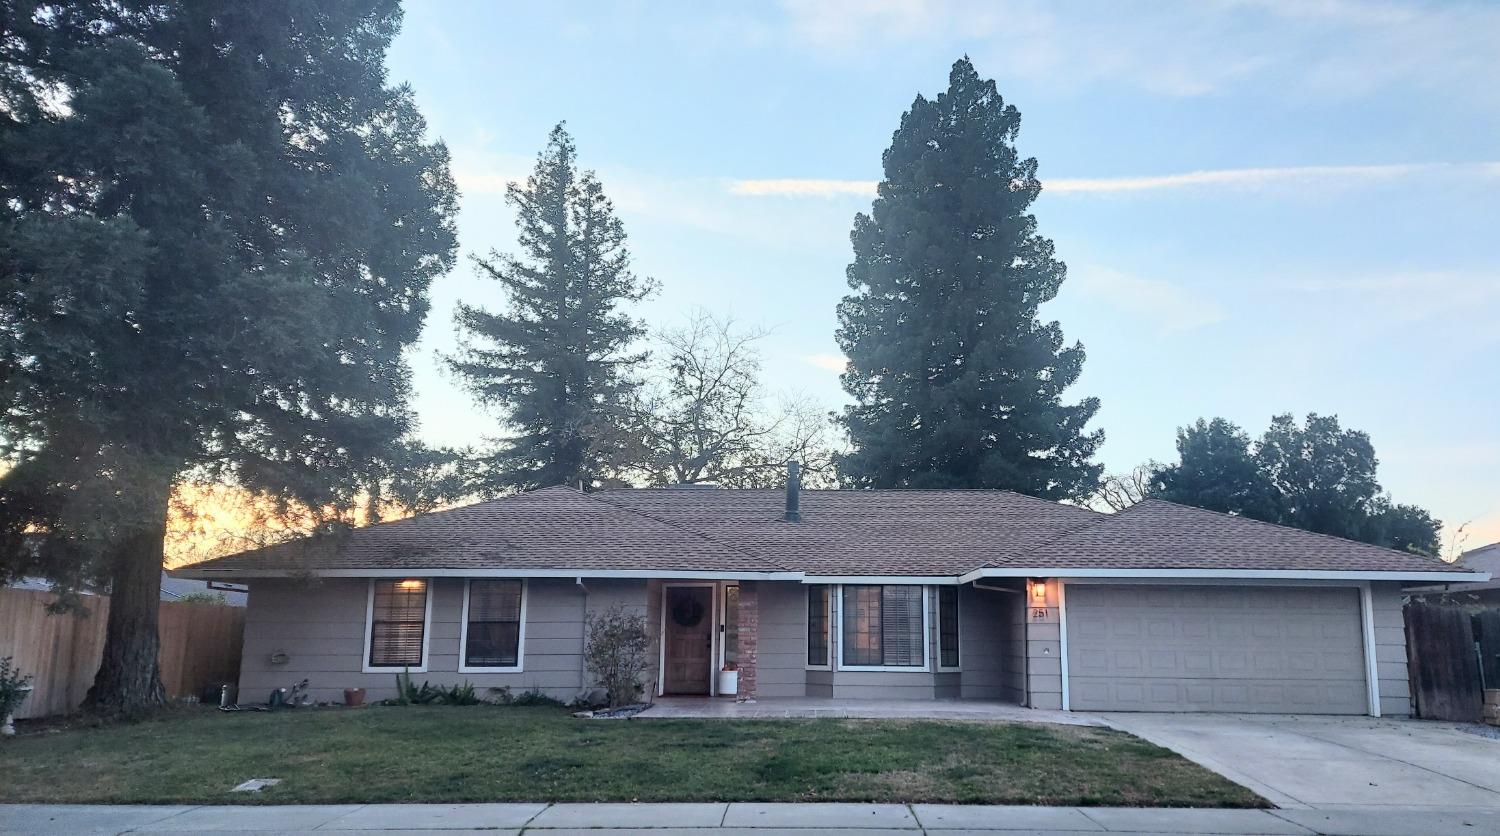 Photo of 251 Shakewood Dr in Yuba City, CA